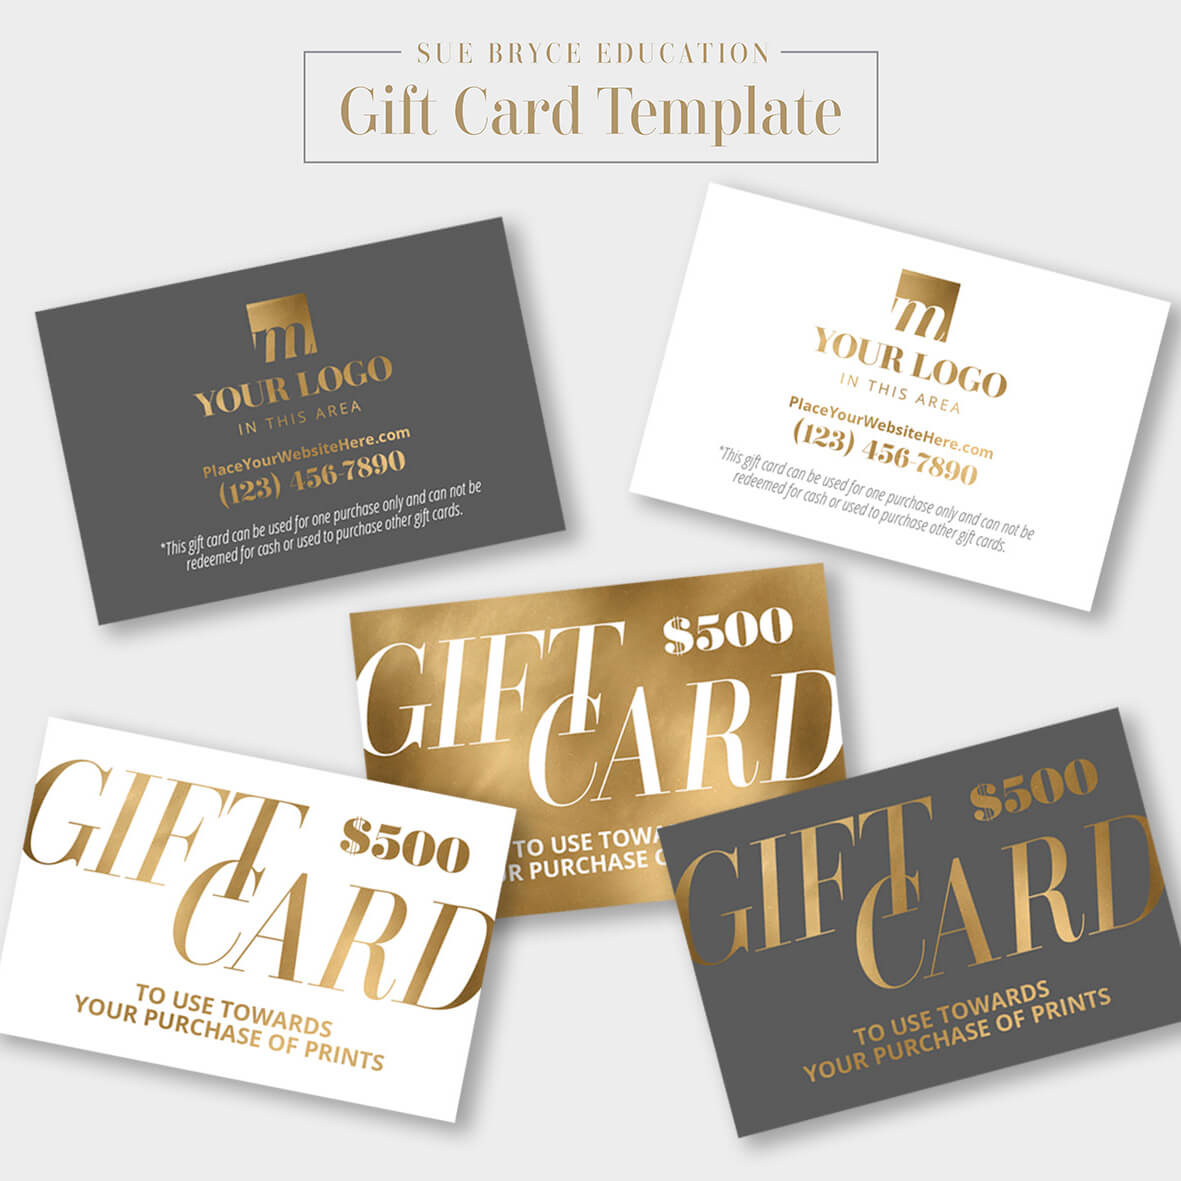 Gift Certificate Templates Indesign Illustrator Gift Coupon With Regard To Gift Card Template Illustrator